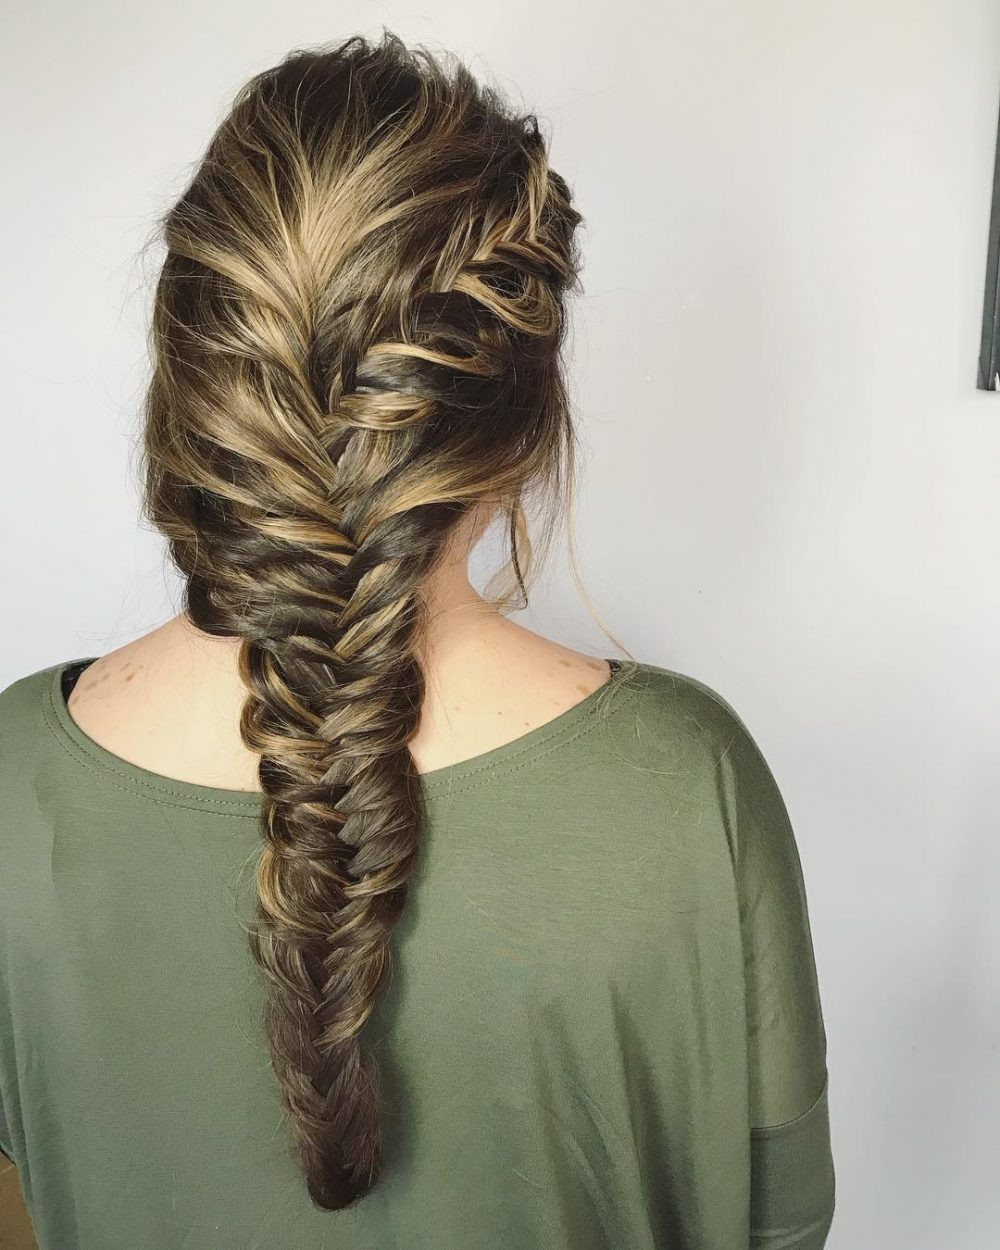 Prom Hairstyles Braided
 38 Cute Prom Hairstyles Guaranteed to Turn Heads